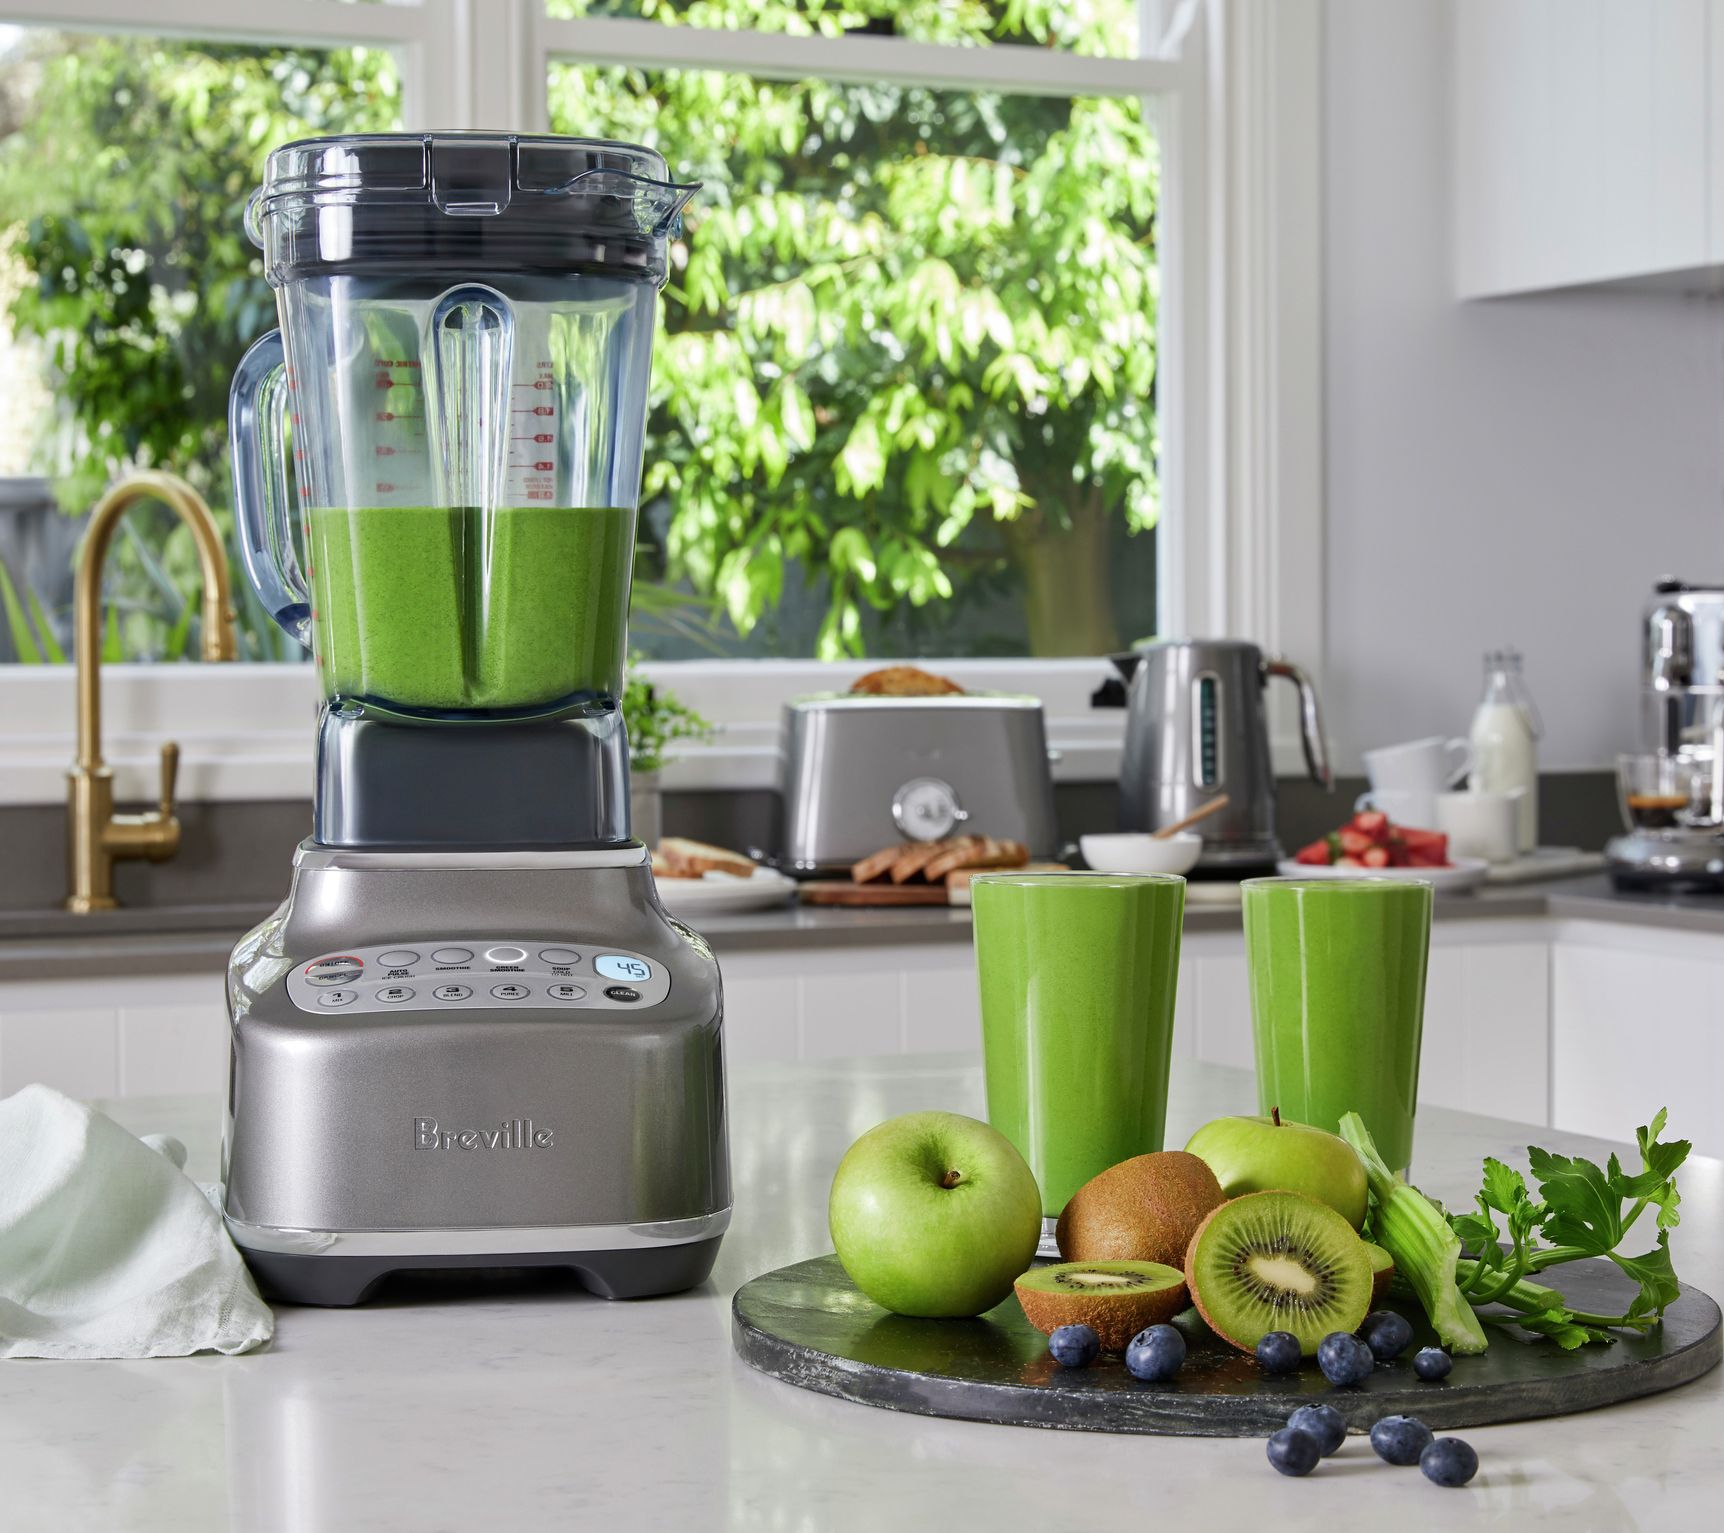 Breville Super Q Blender Review: A Powerful Addition to Your